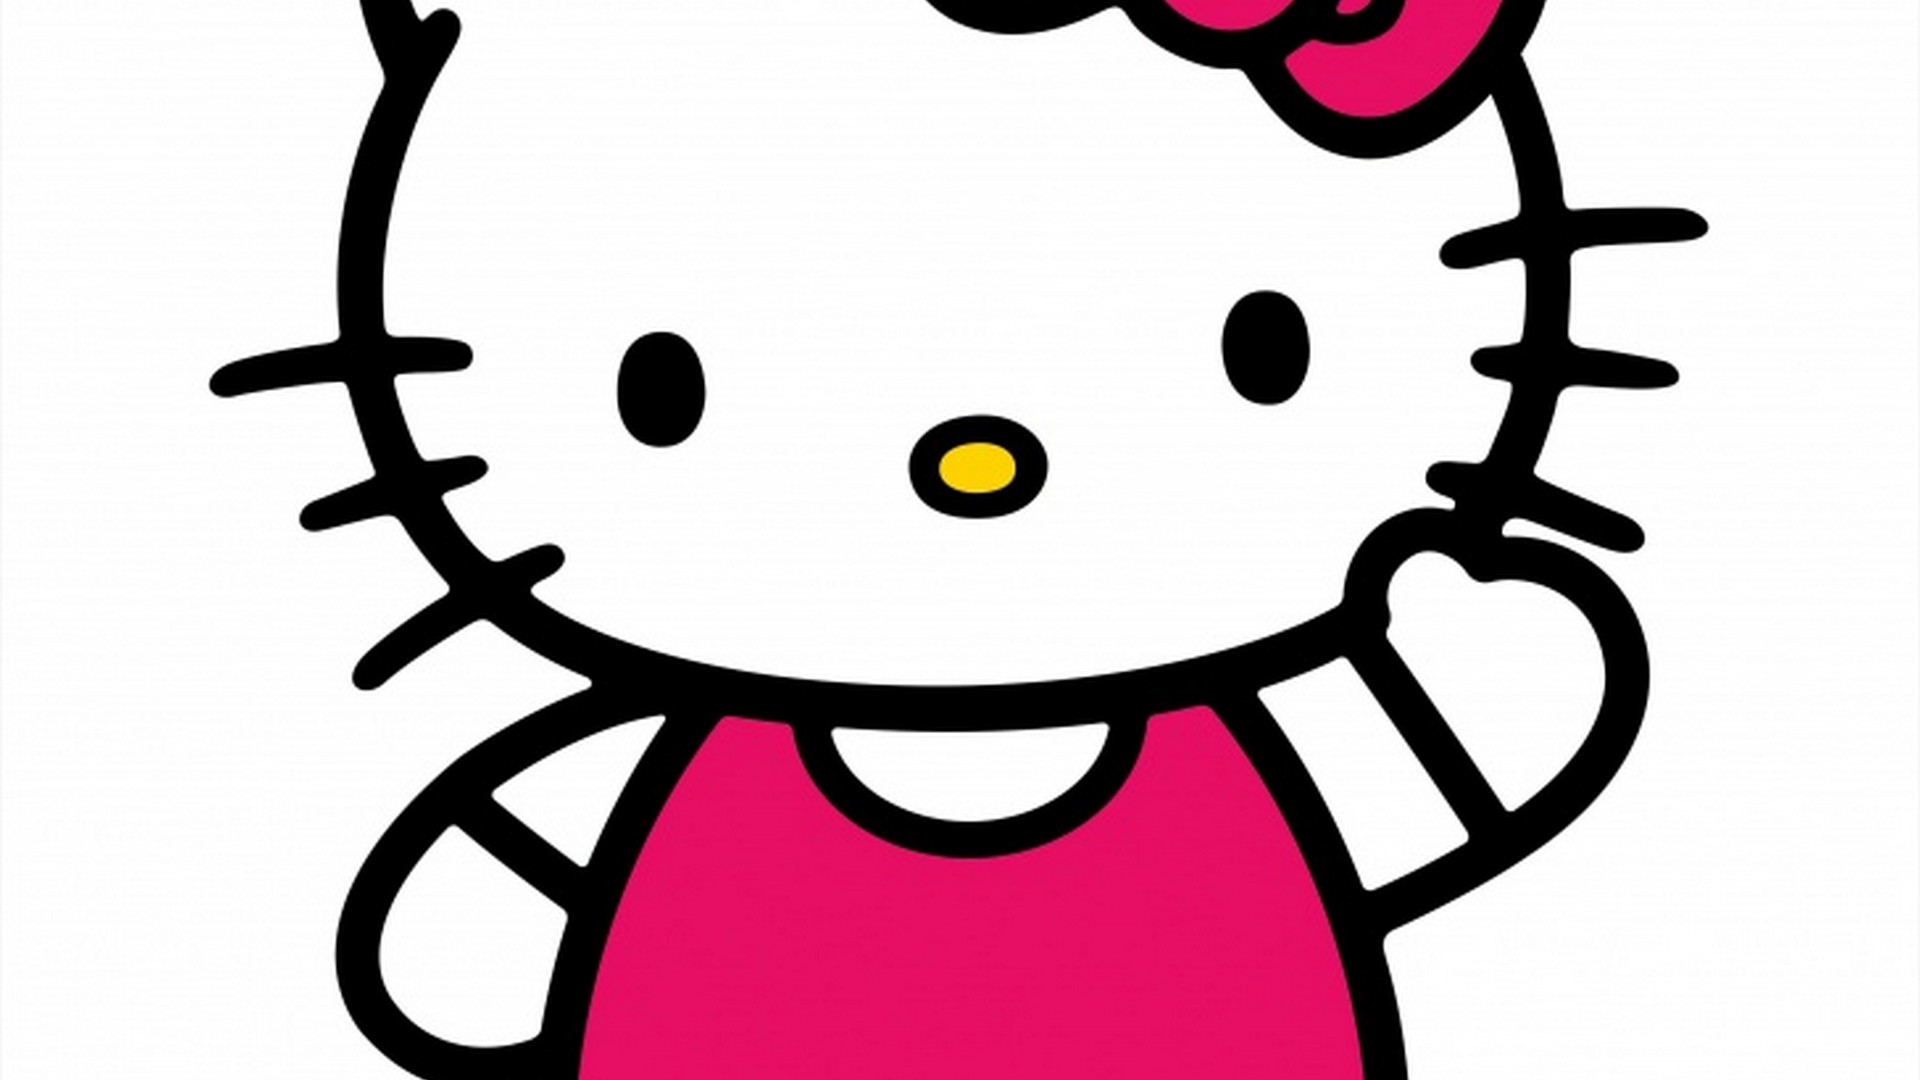 HD Wallpaper Hello Kitty Characters With Resolution 1920X1080 pixel. You can make this wallpaper for your Desktop Computer Backgrounds, Mac Wallpapers, Android Lock screen or iPhone Screensavers